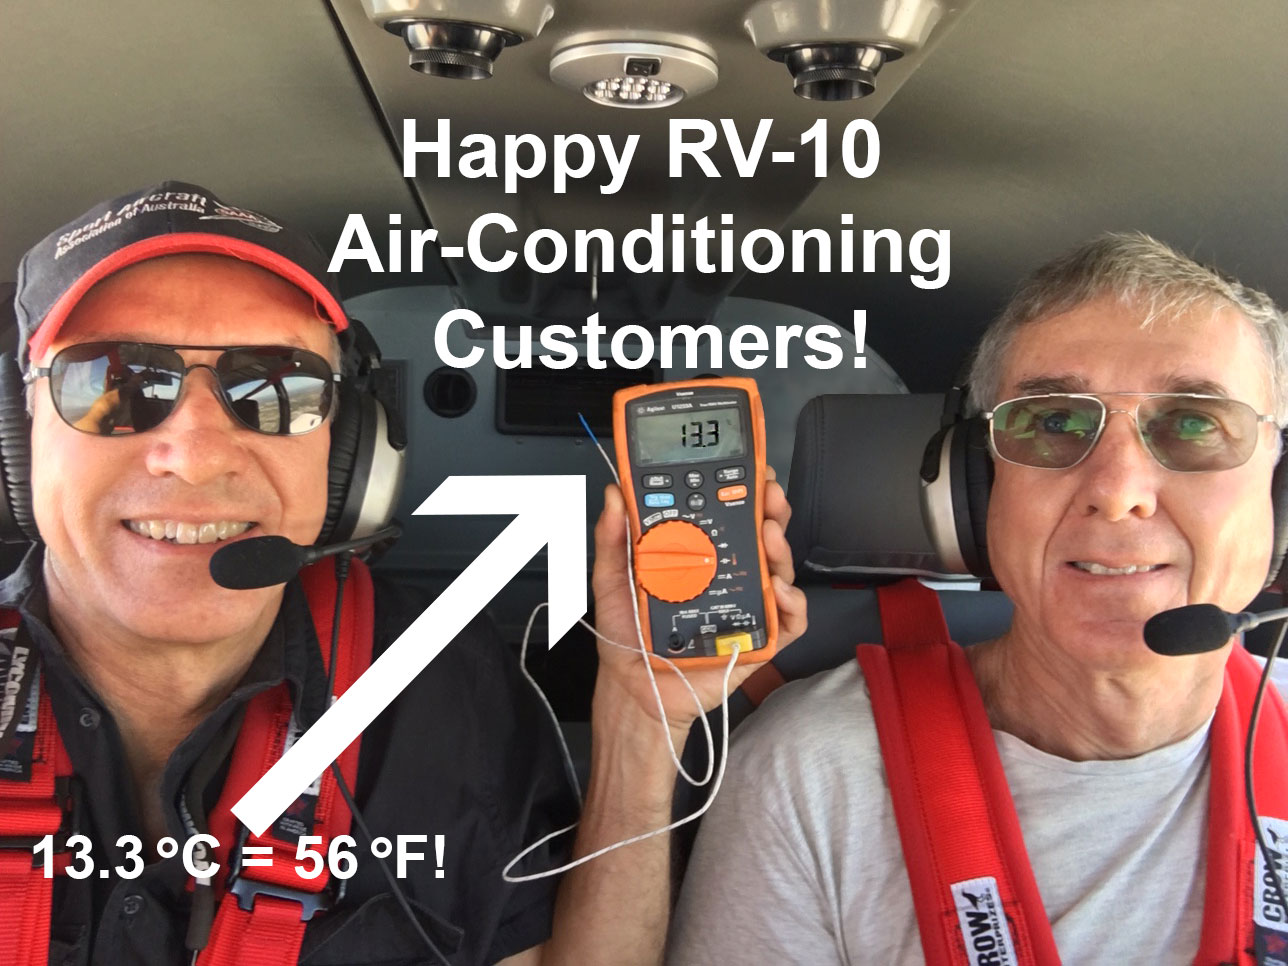 Happy RV-10 Air Conditioning Customers